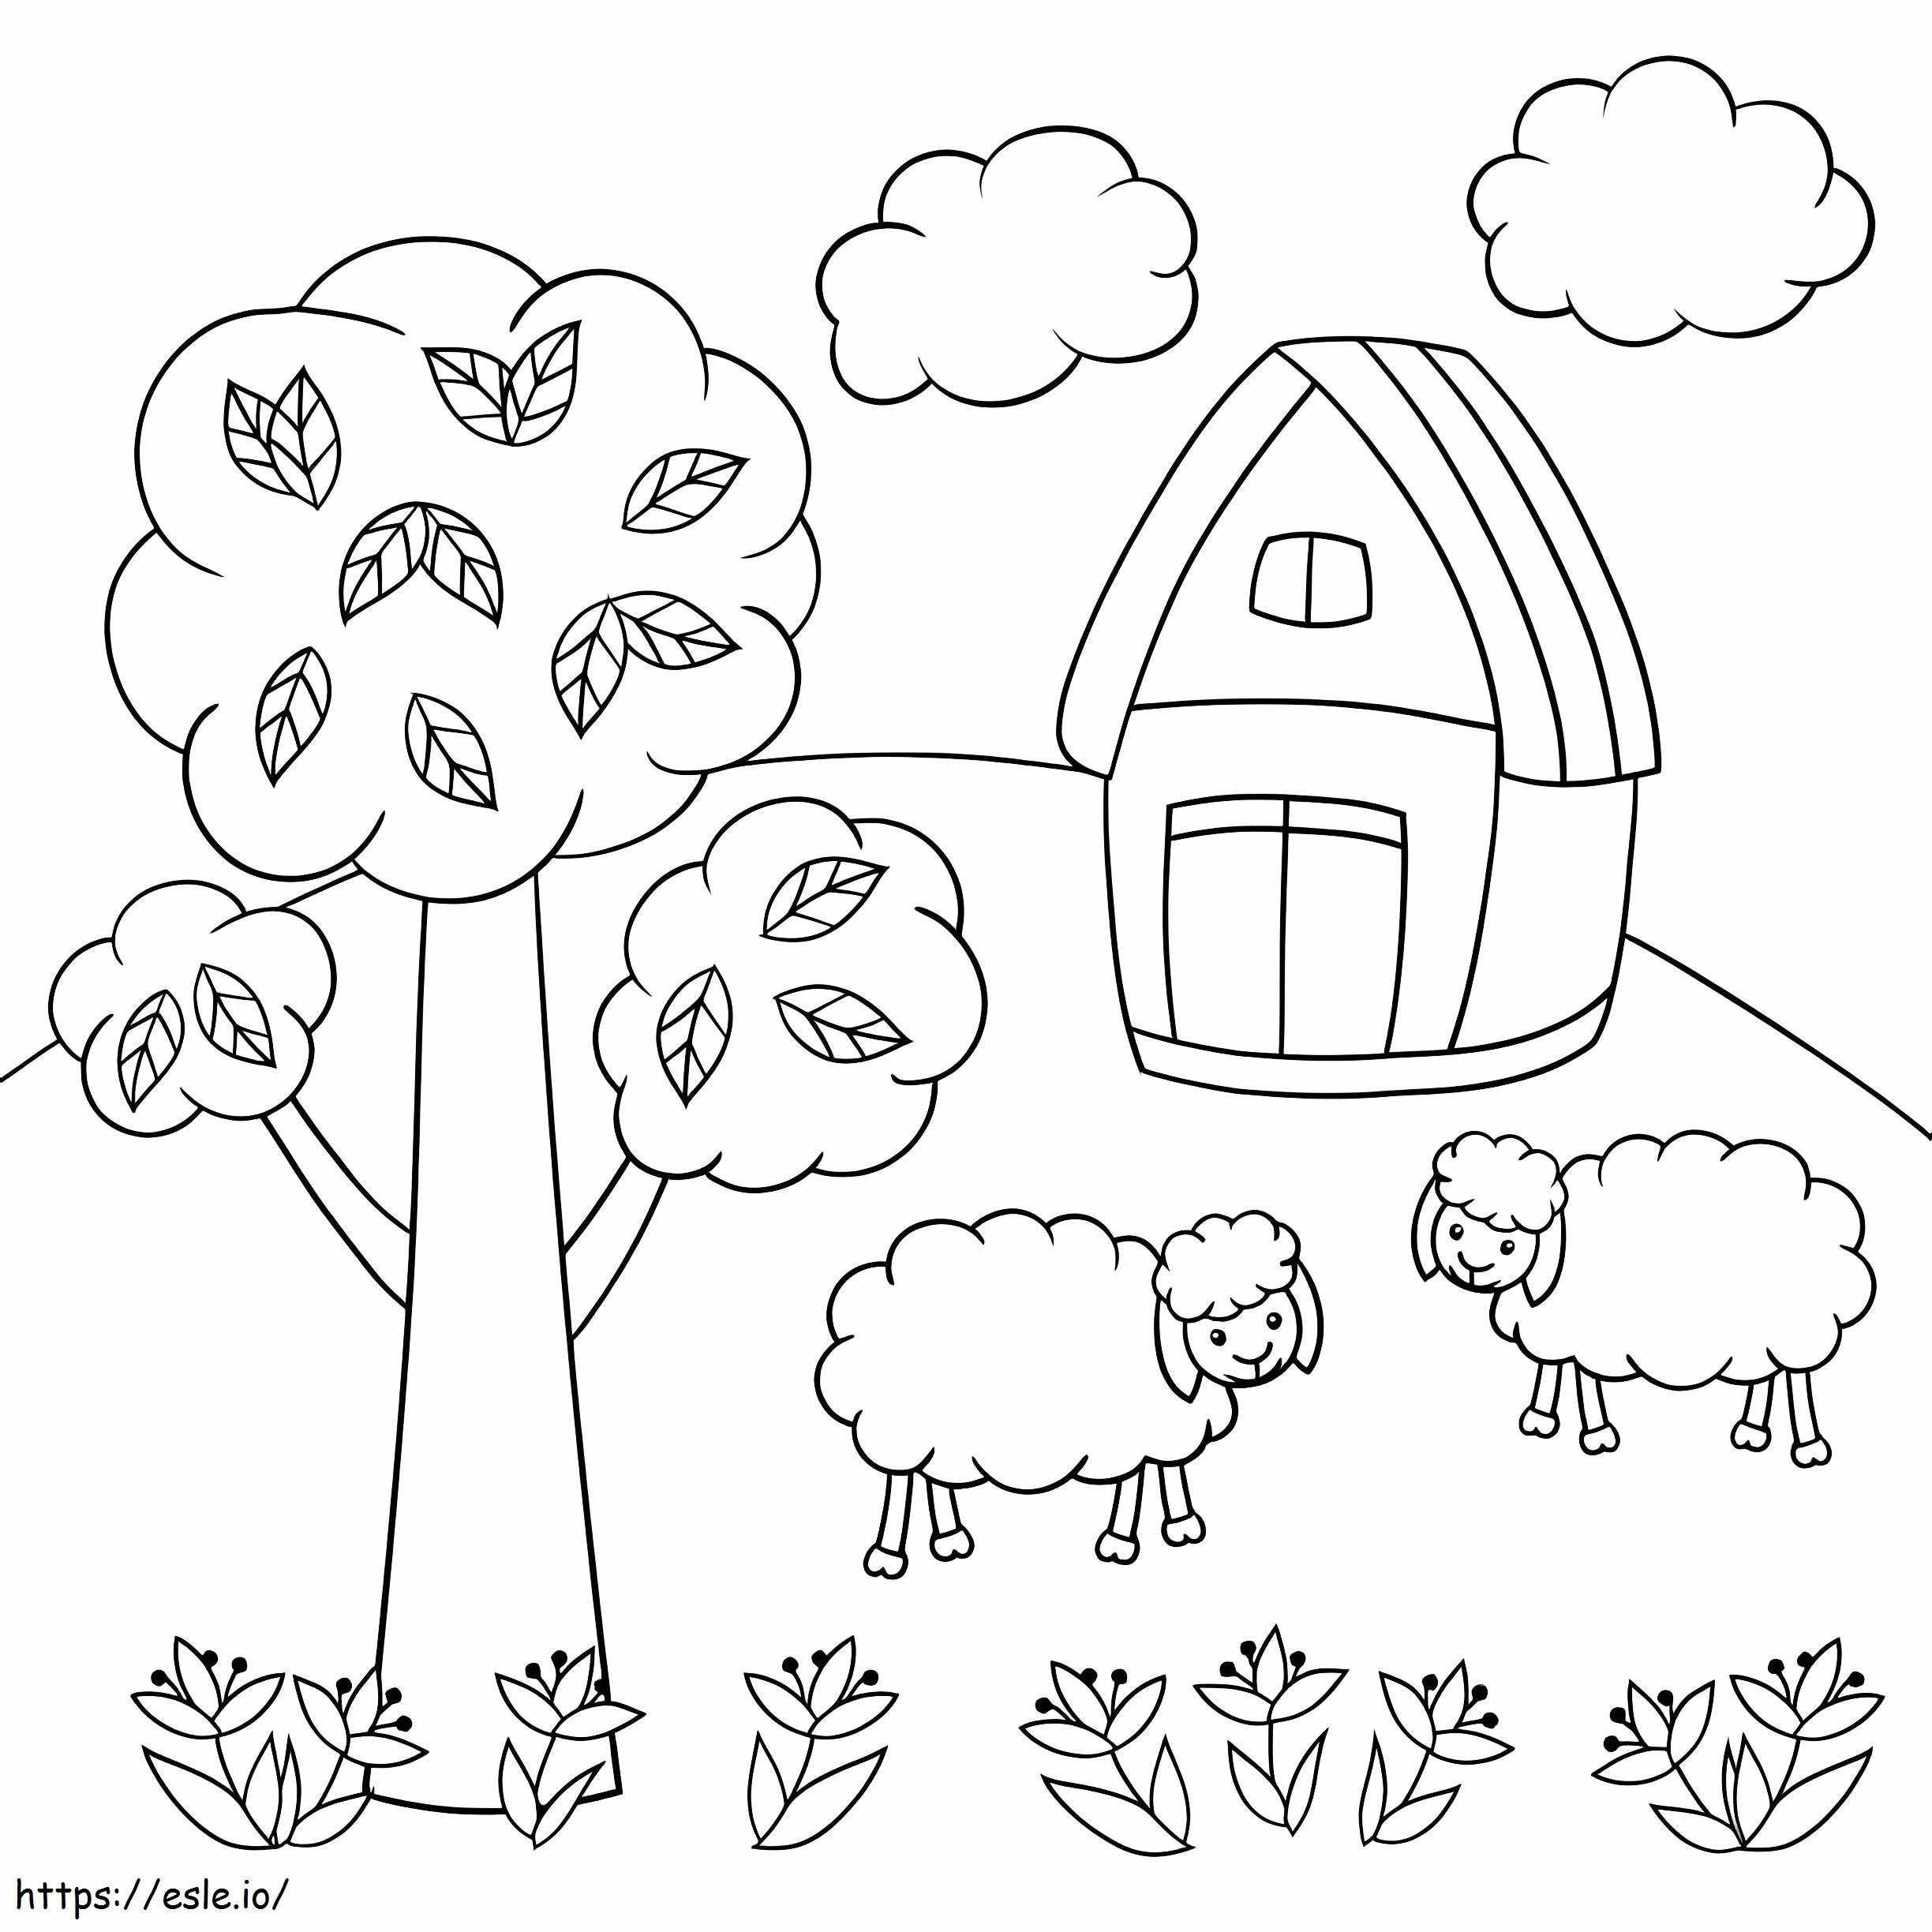 Two Sheep coloring page